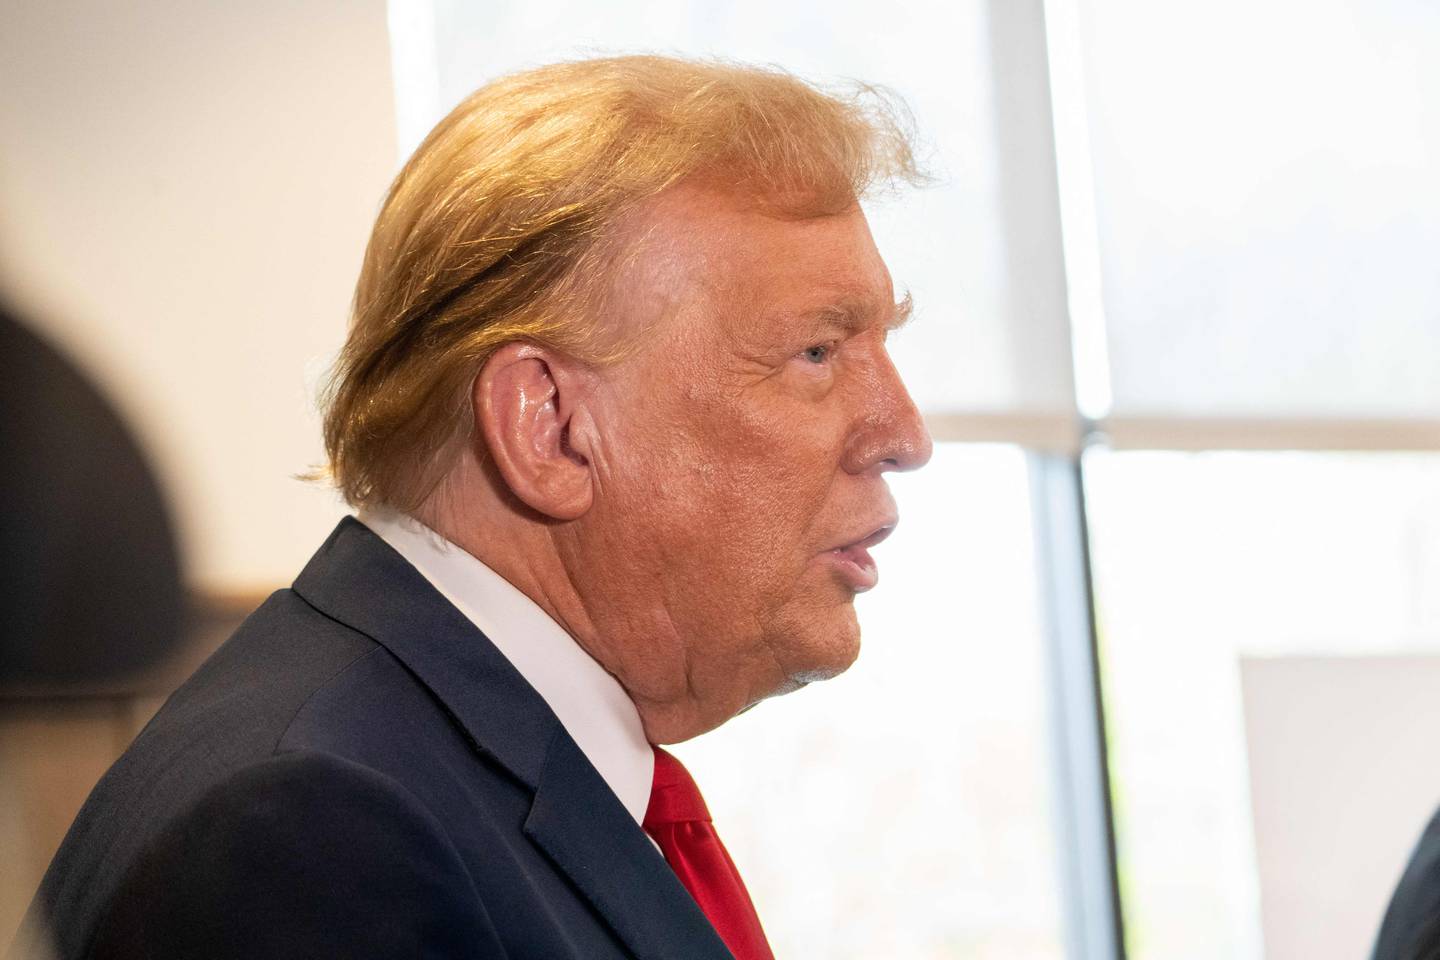 ATLANTA, GEORGIA - APRIL 10: Former U.S. President Donald Trump makes a visit to a Chick-fil-A restaurant on April 10, 2024 in Atlanta, Georgia. Trump is visiting Atlanta for a campaign fundraising event he is hosting.   Megan Varner/Getty Images/AFP (Photo by Megan Varner / GETTY IMAGES NORTH AMERICA / Getty Images via AFP)